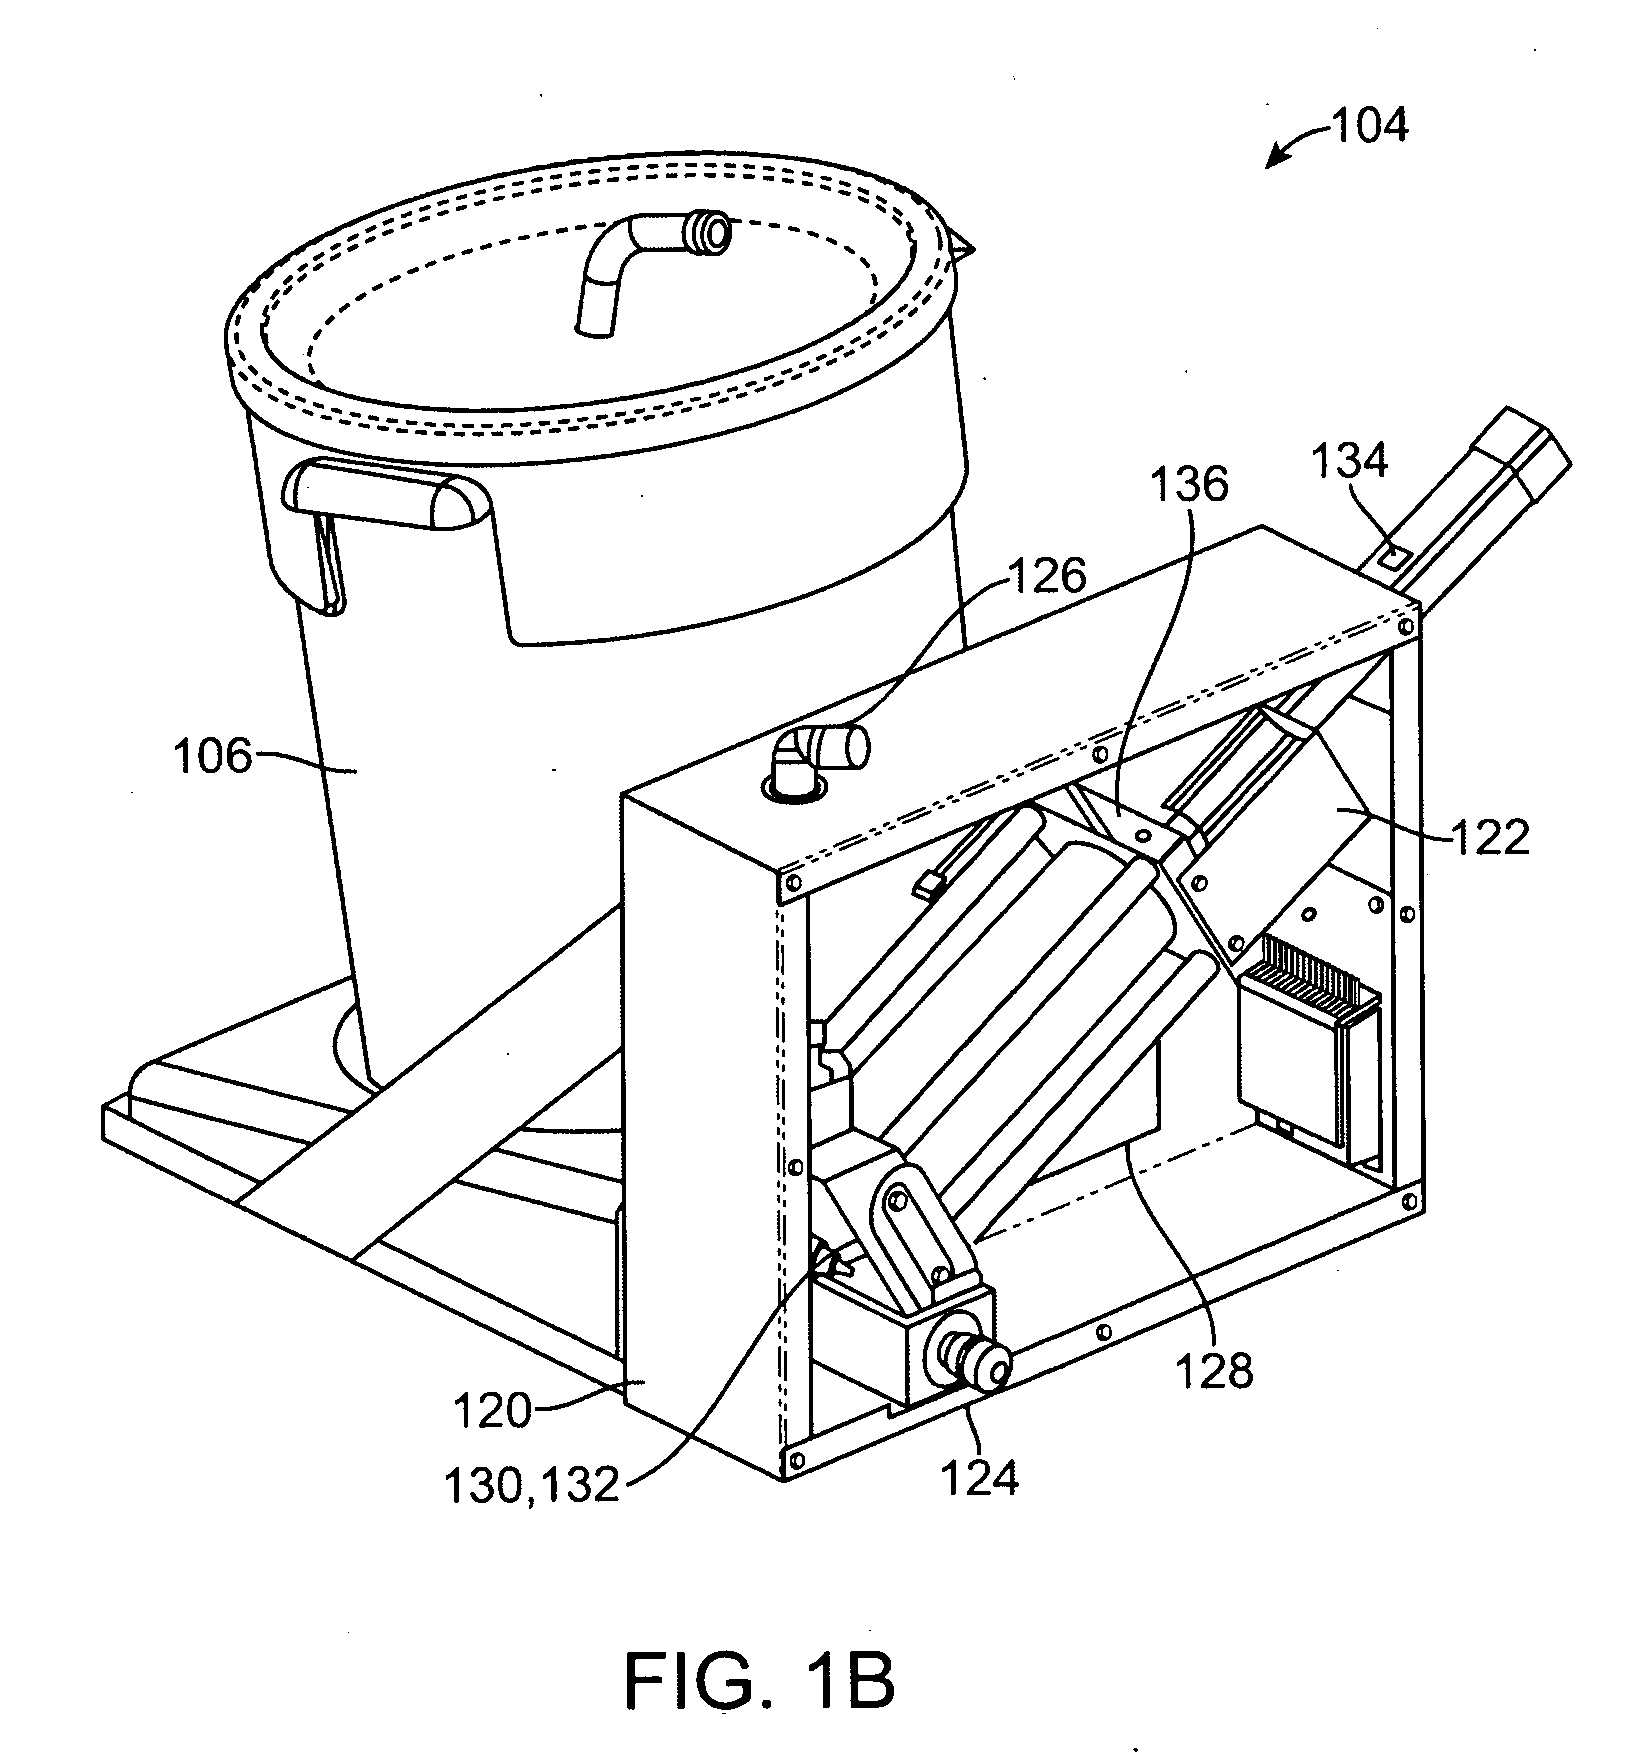 Cassette and Vat Supply Source for an On-Demand Mixing and Distributing of a Food Product